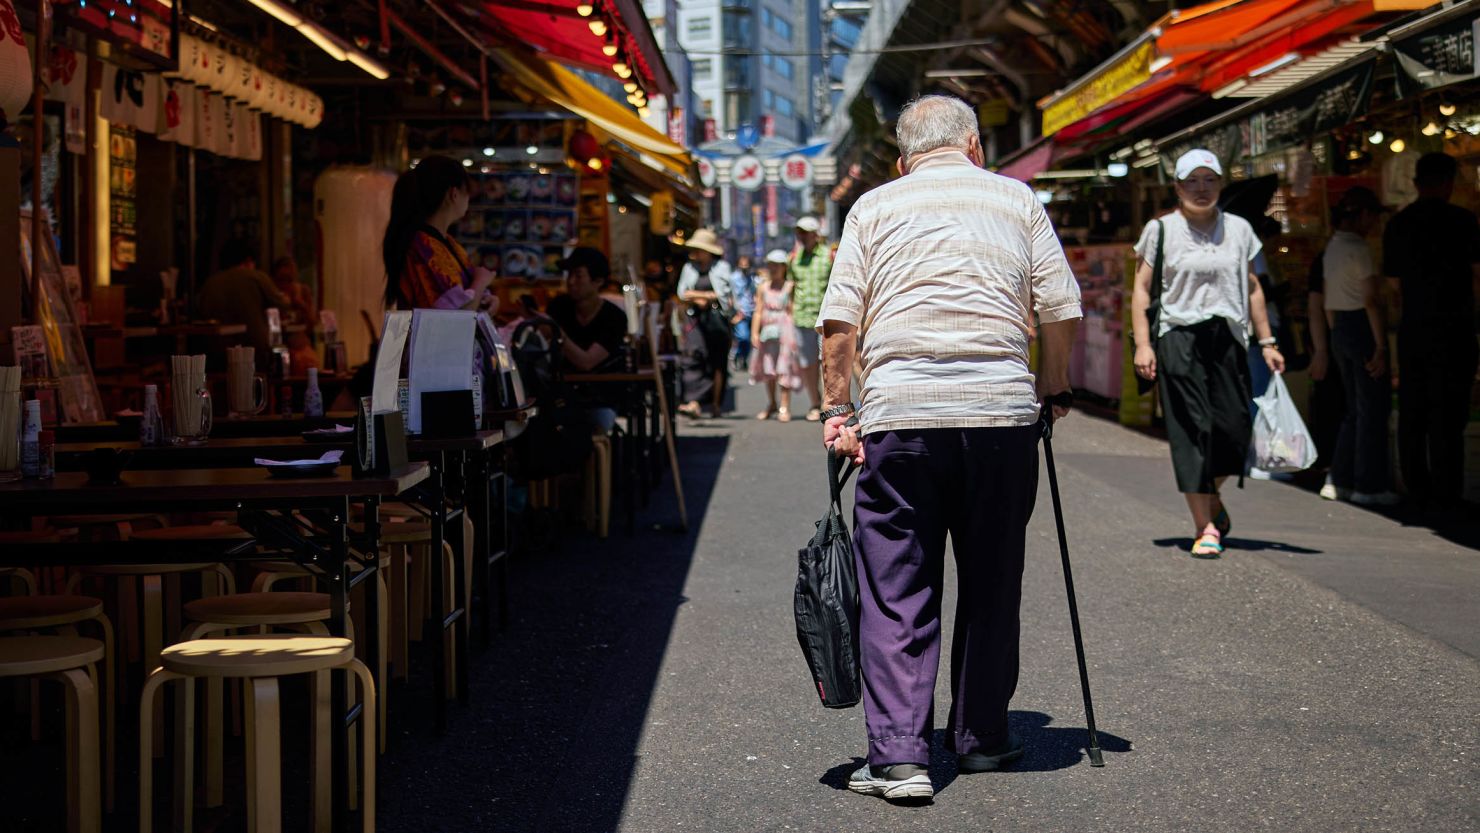 Japan's proportion of elderly people is the highest in the world.